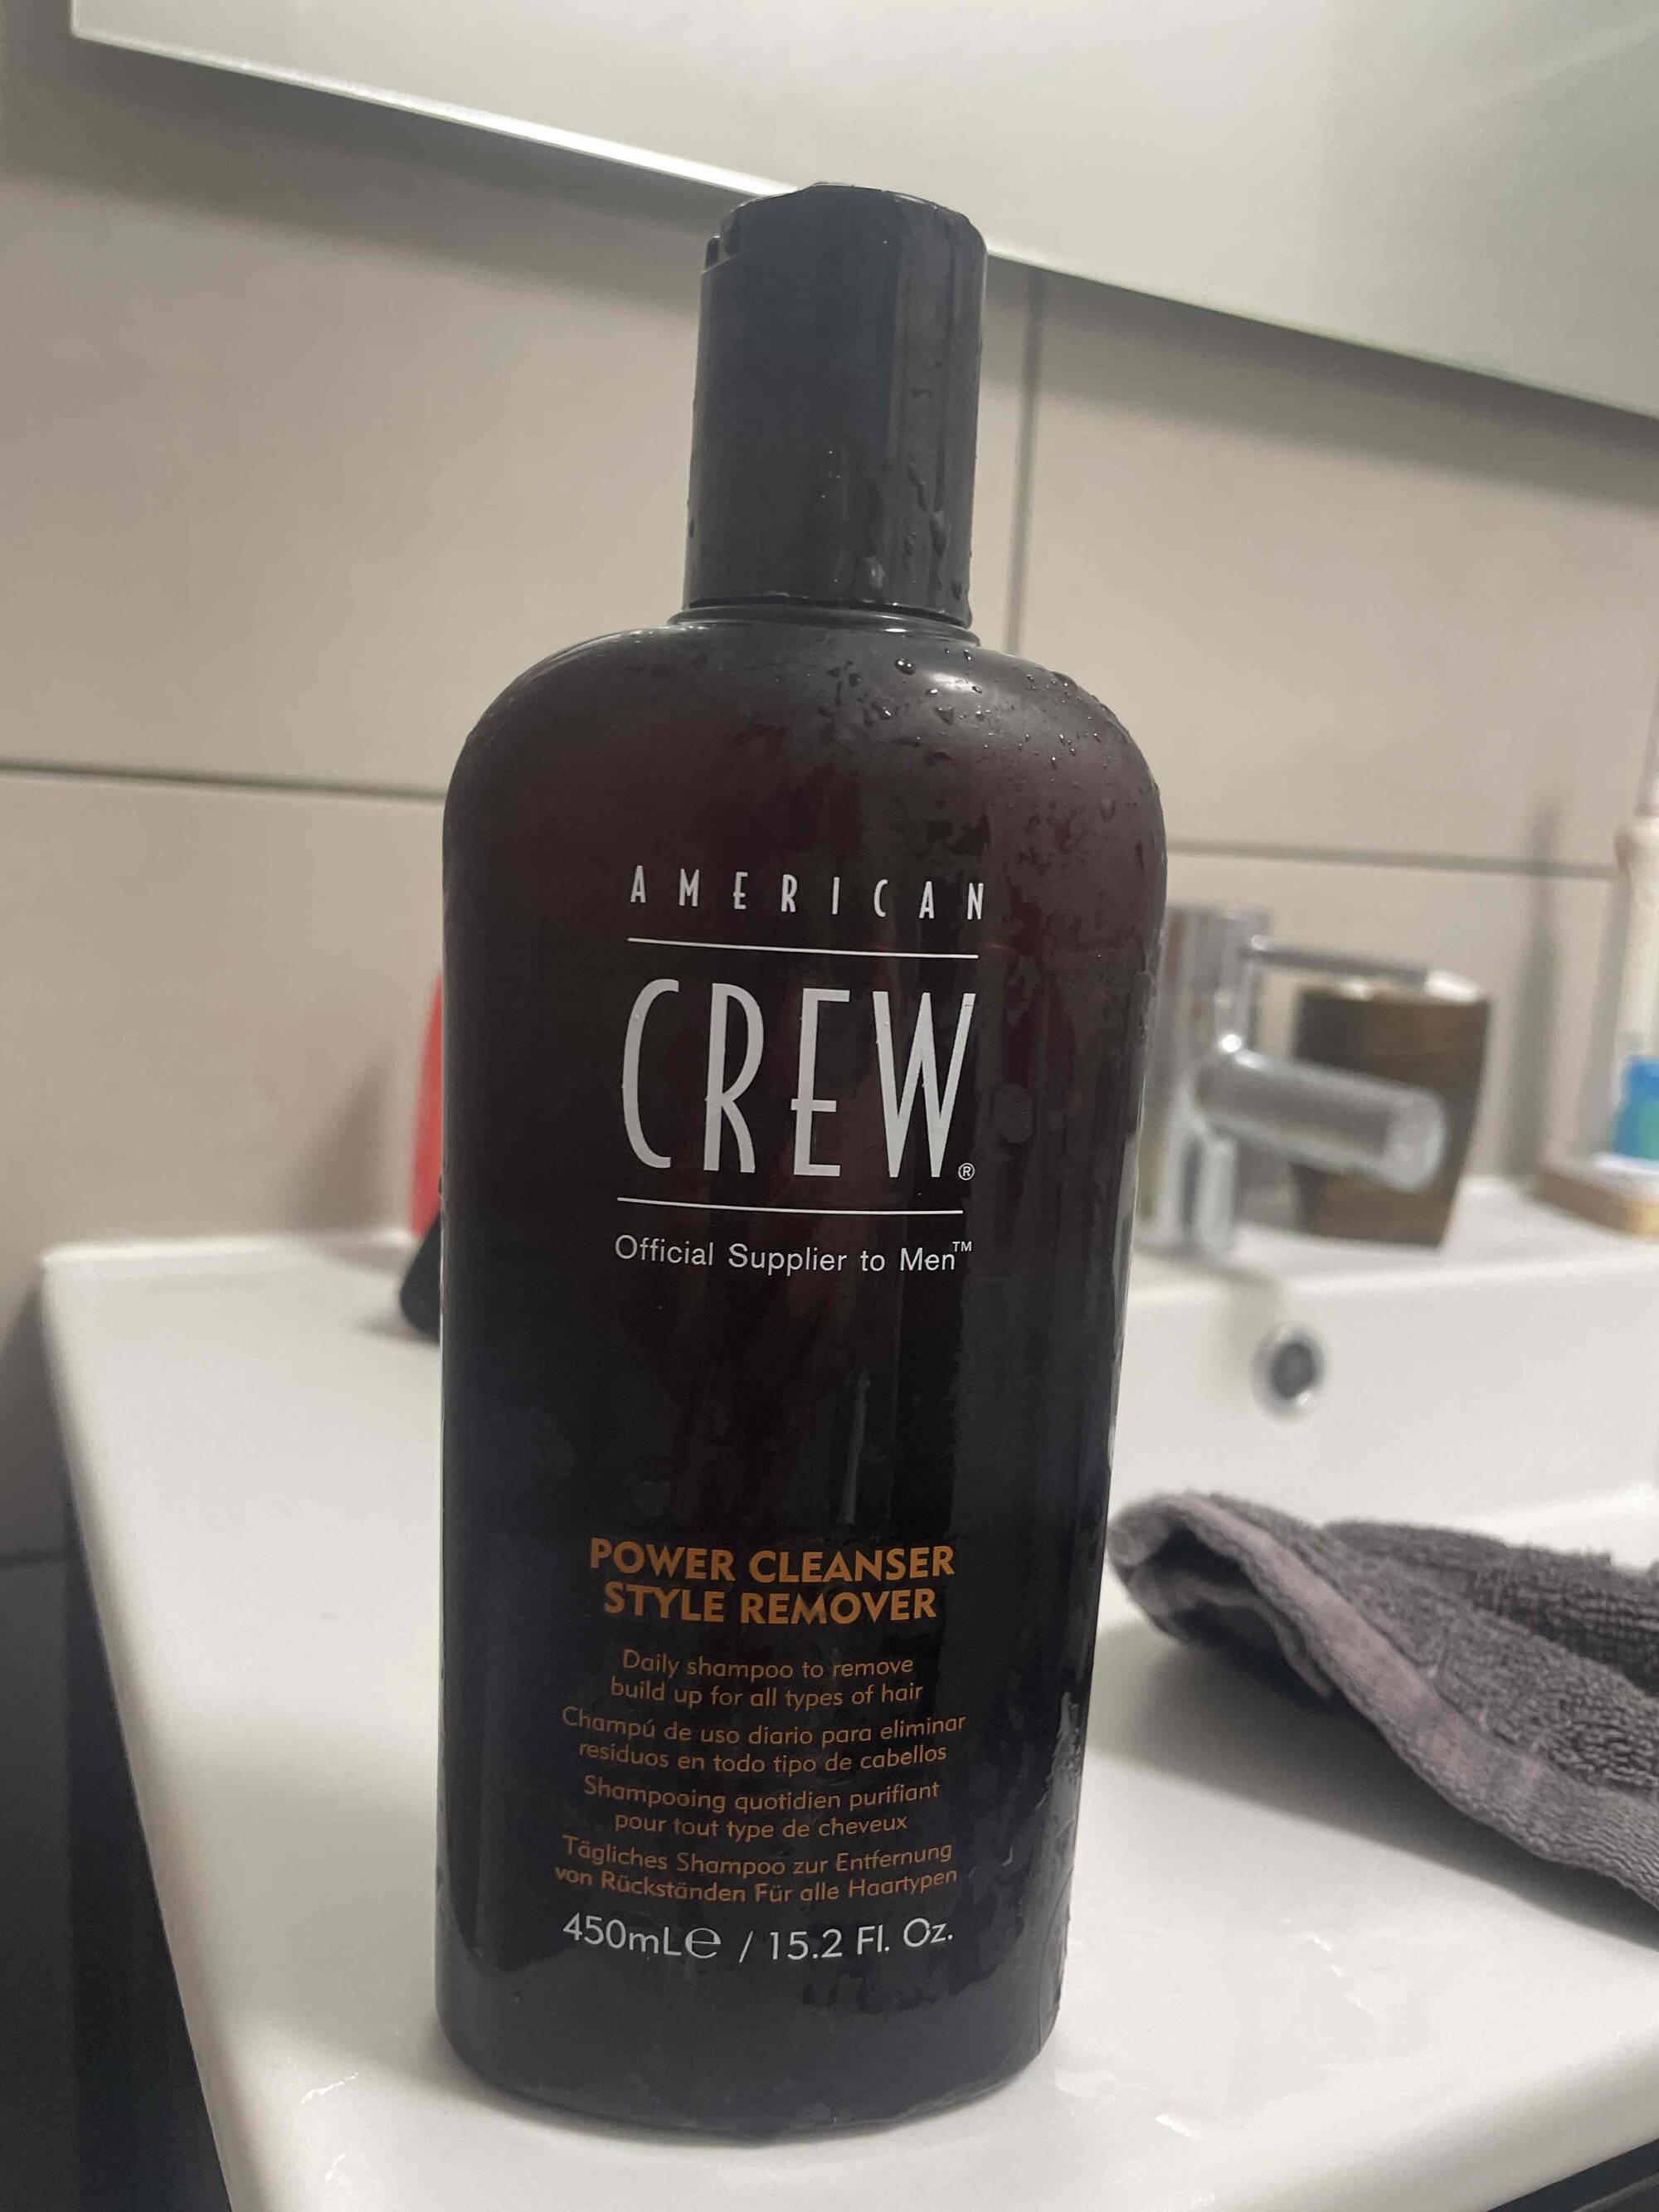 AMERICAN CREW - Power cleanser style remover - Shampooing